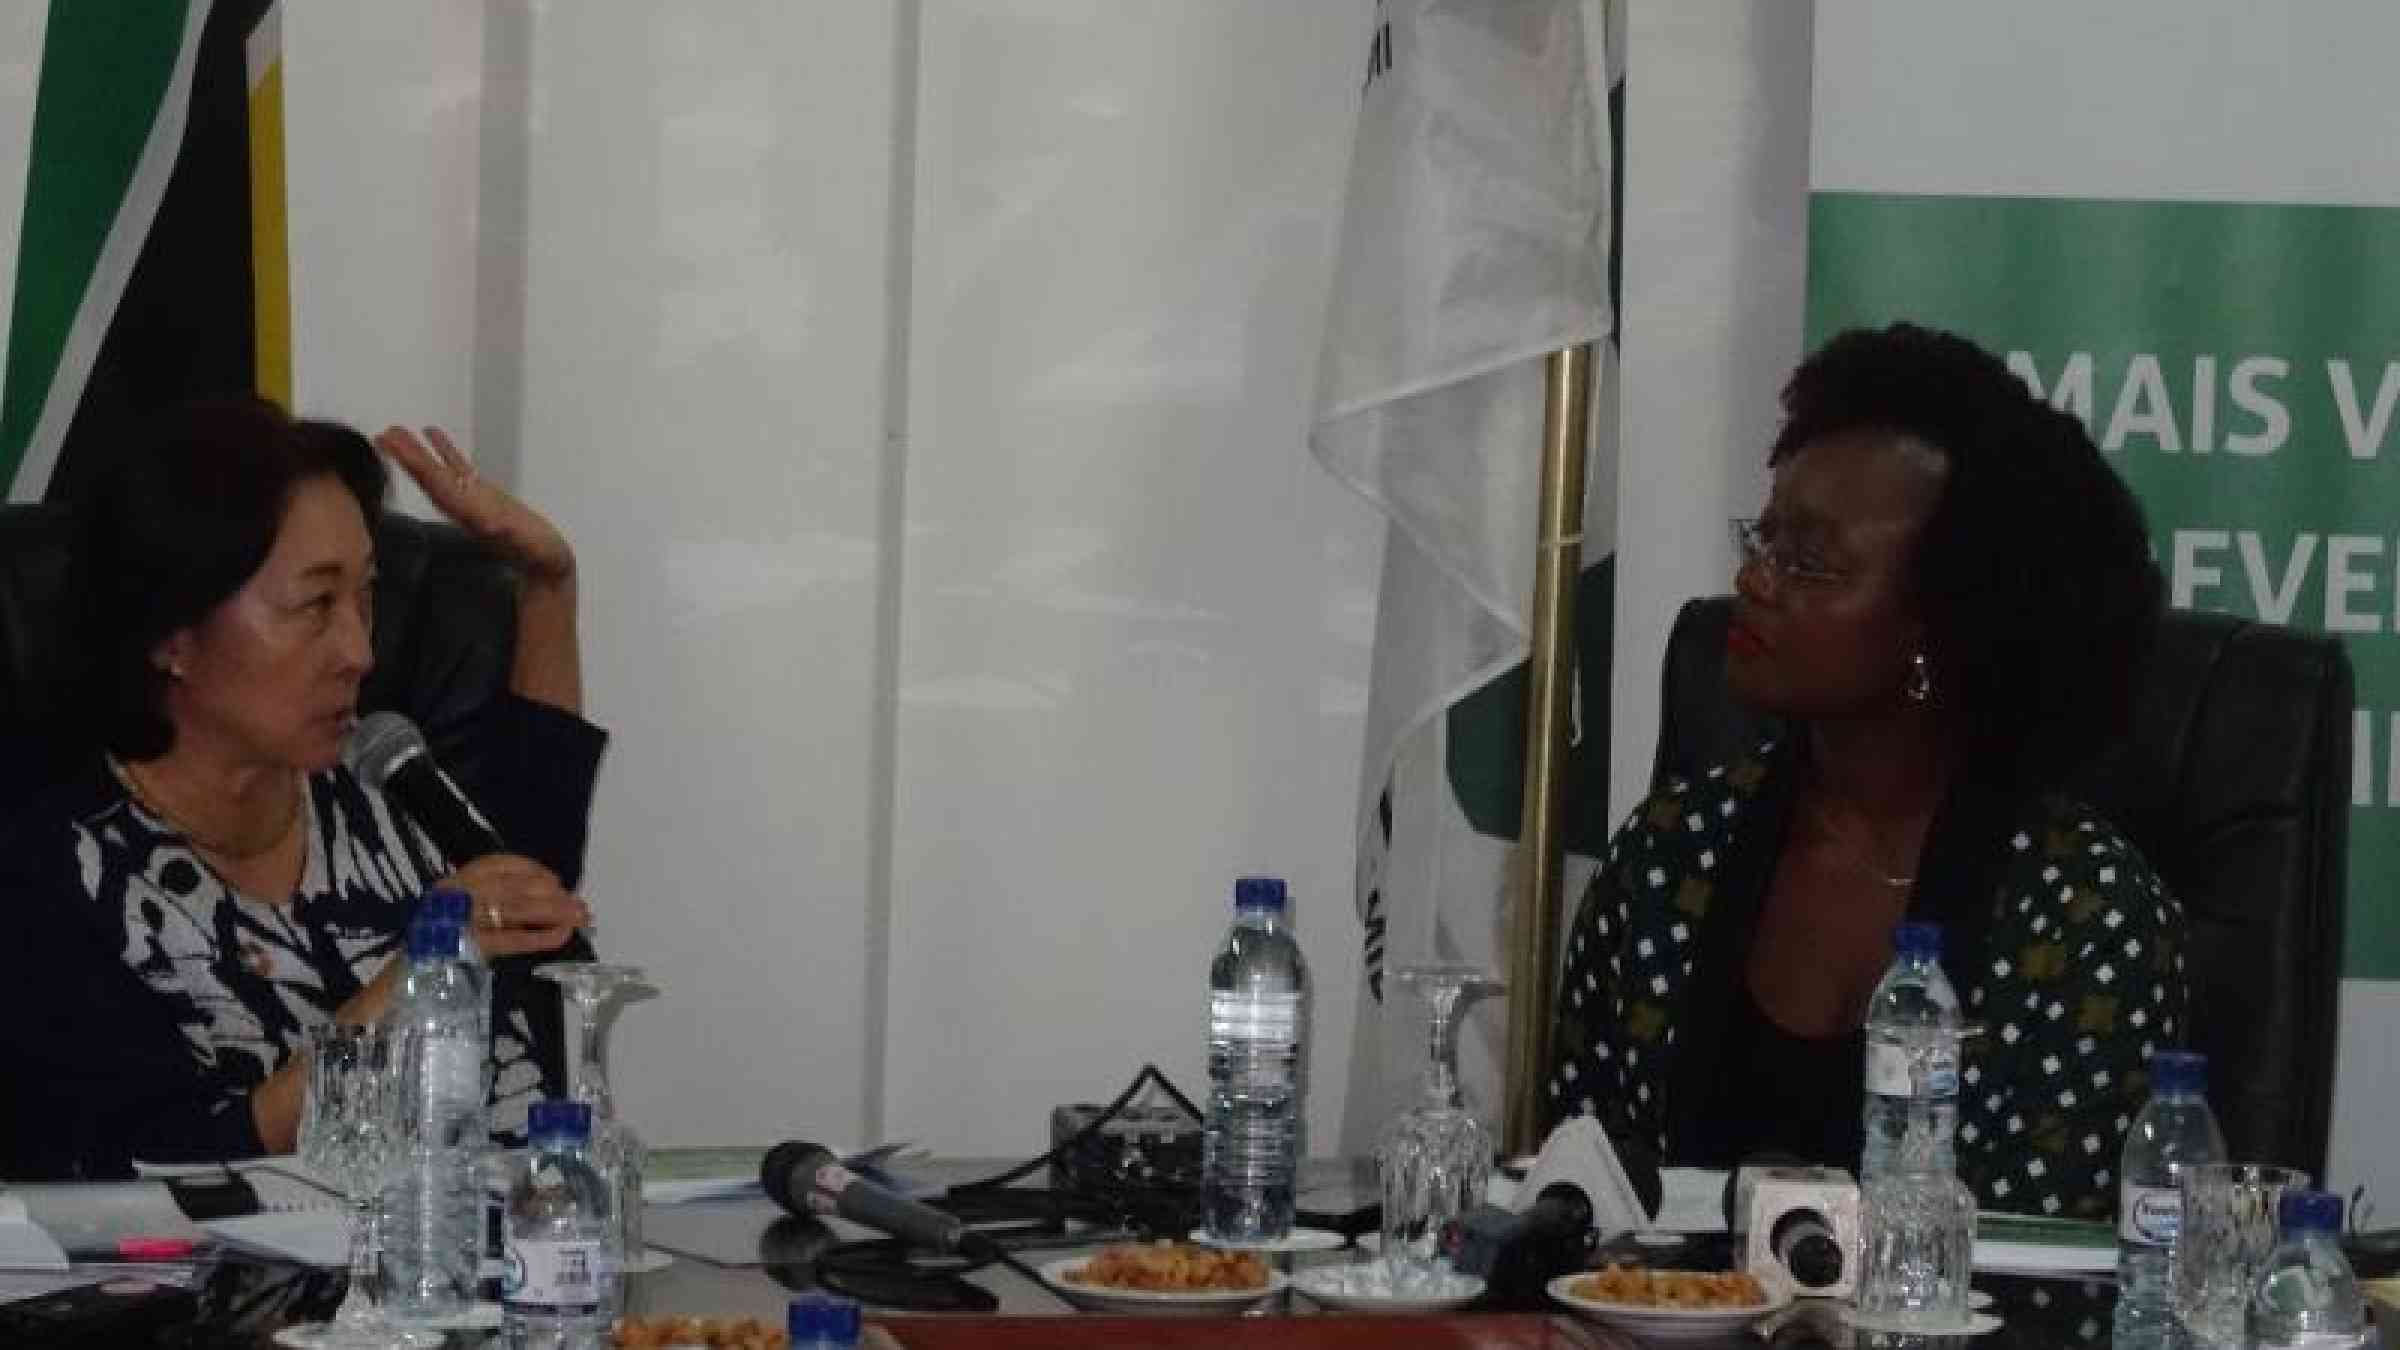 UNDRR chief, Mami Mizutori, with the head of Mozambique's disaster management agency, Augusta Maita, at a meeting of the country's National Platform for Disaster Risk Reduction